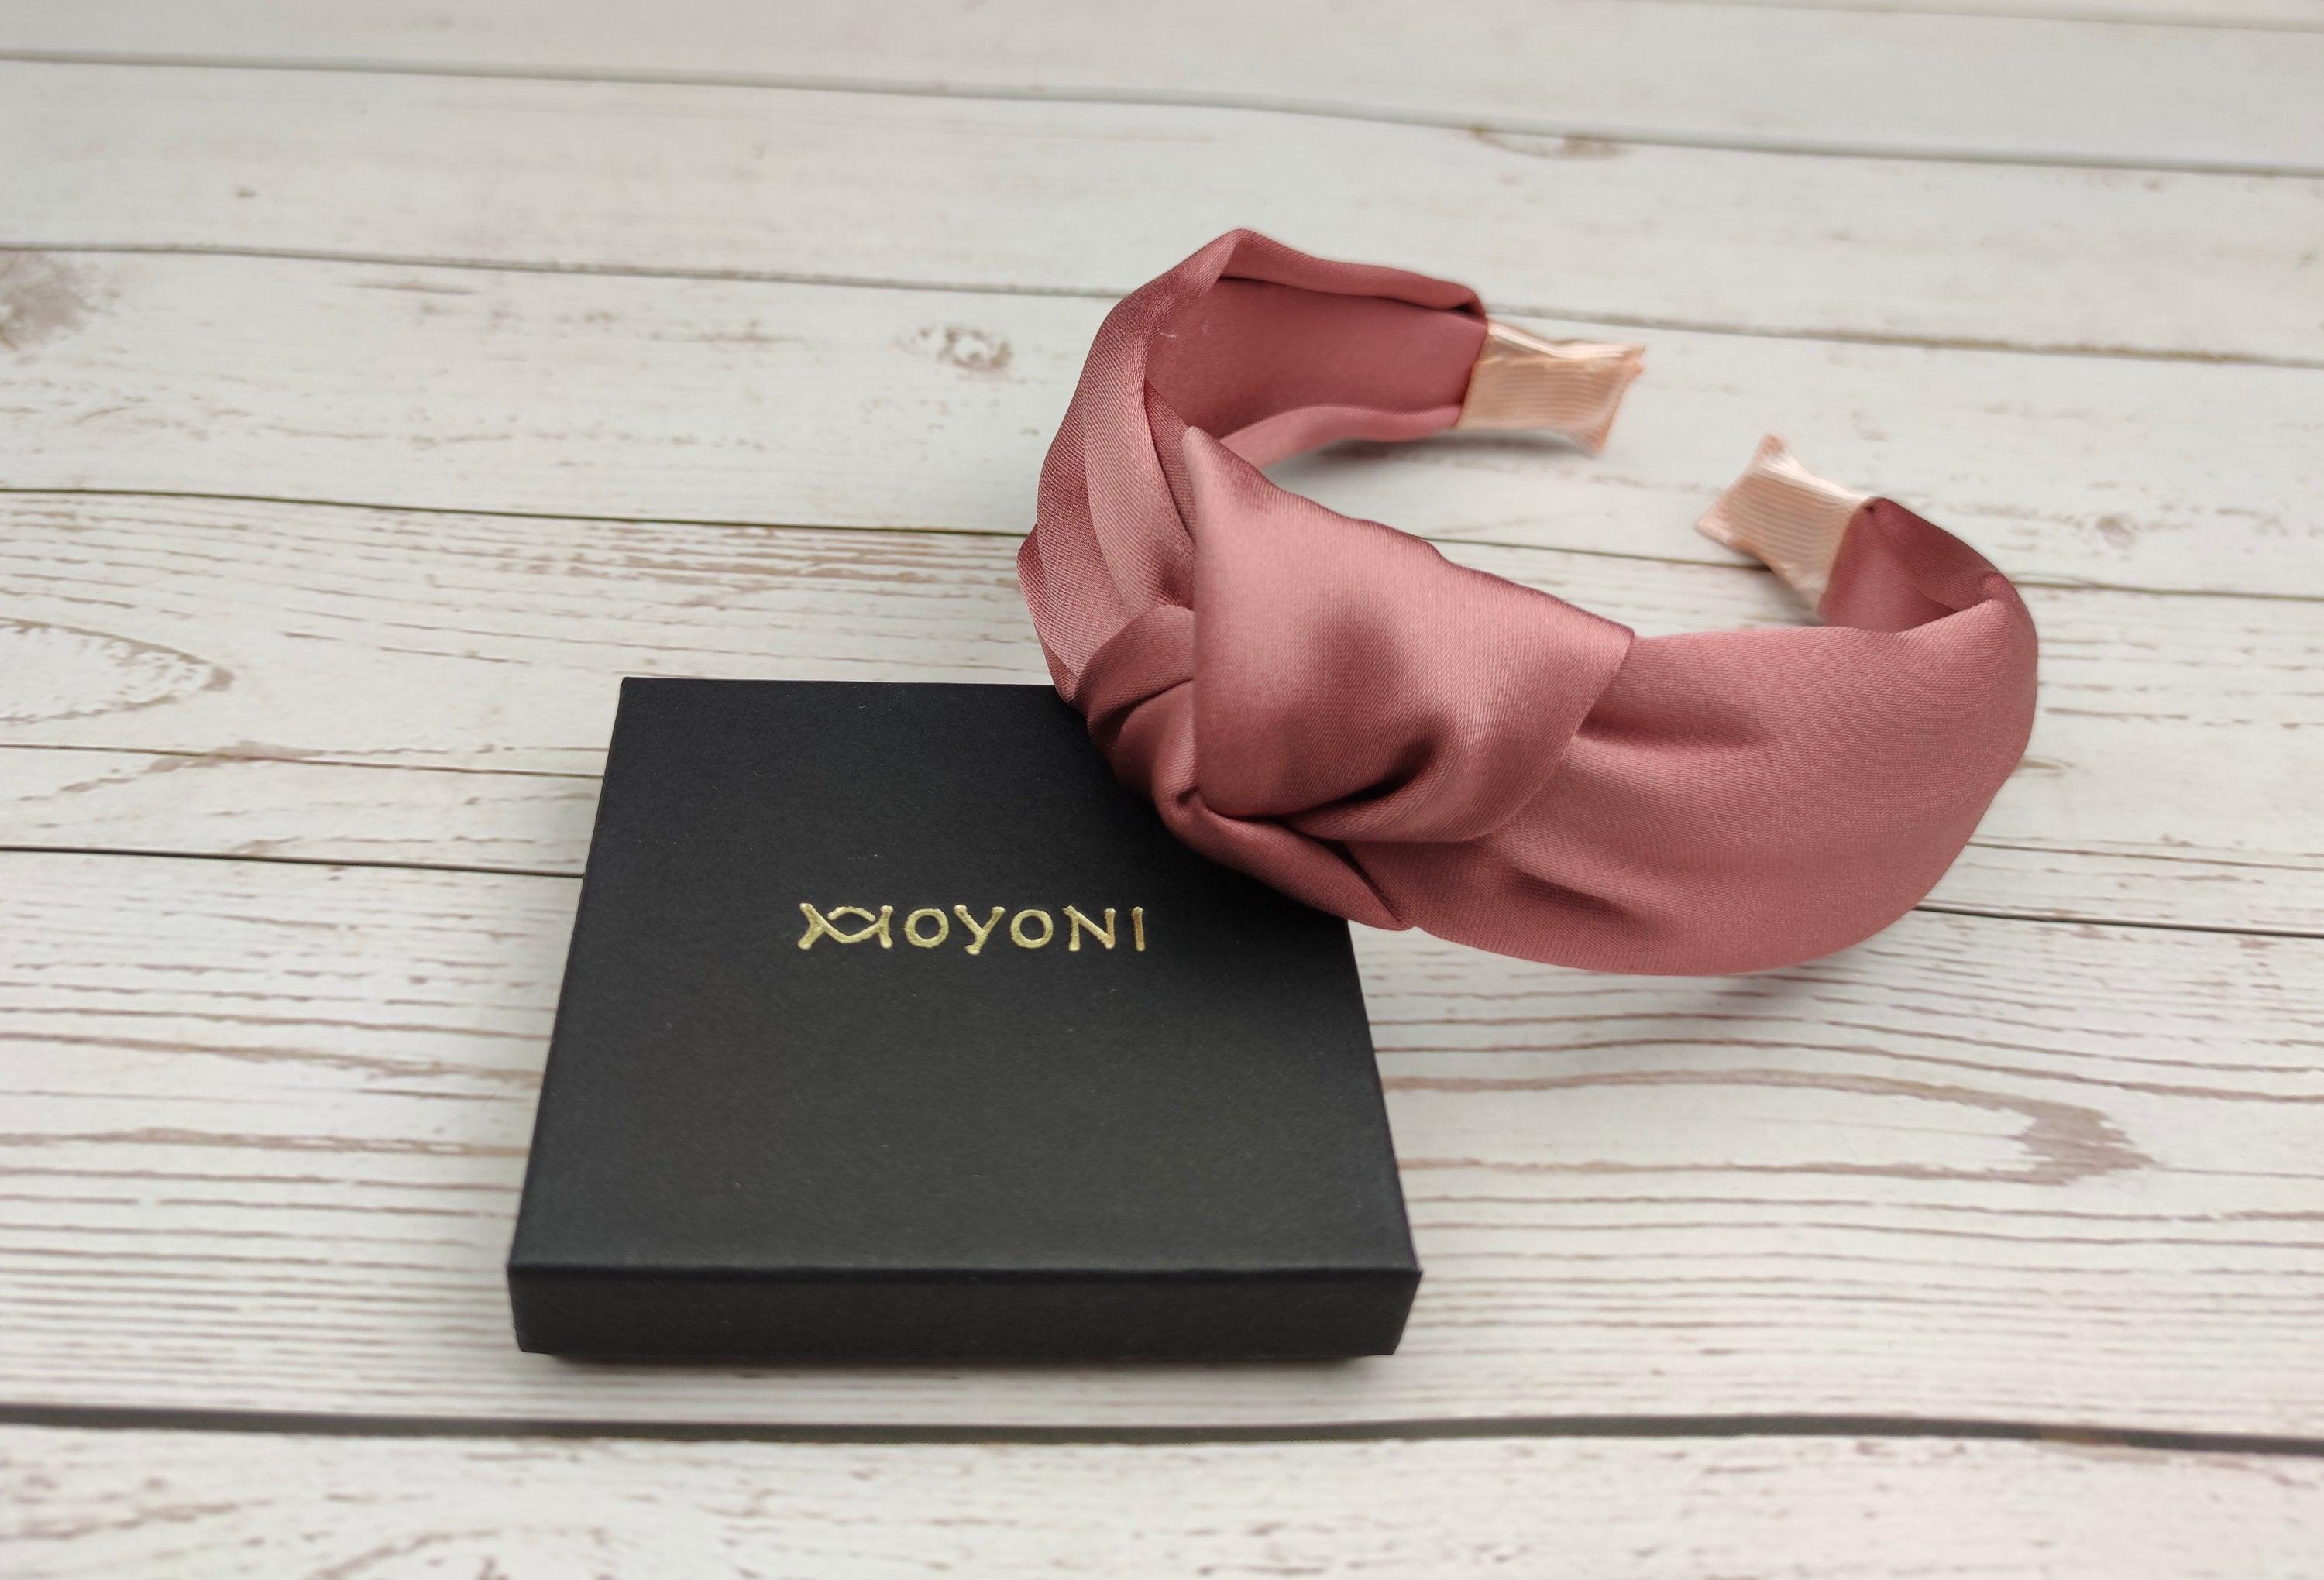 Beautiful Satin Salmon Pink Knotted Headband - Women's Fashionable Hair Accessory in Pastel Pink Turban Style available at Moyoni Design